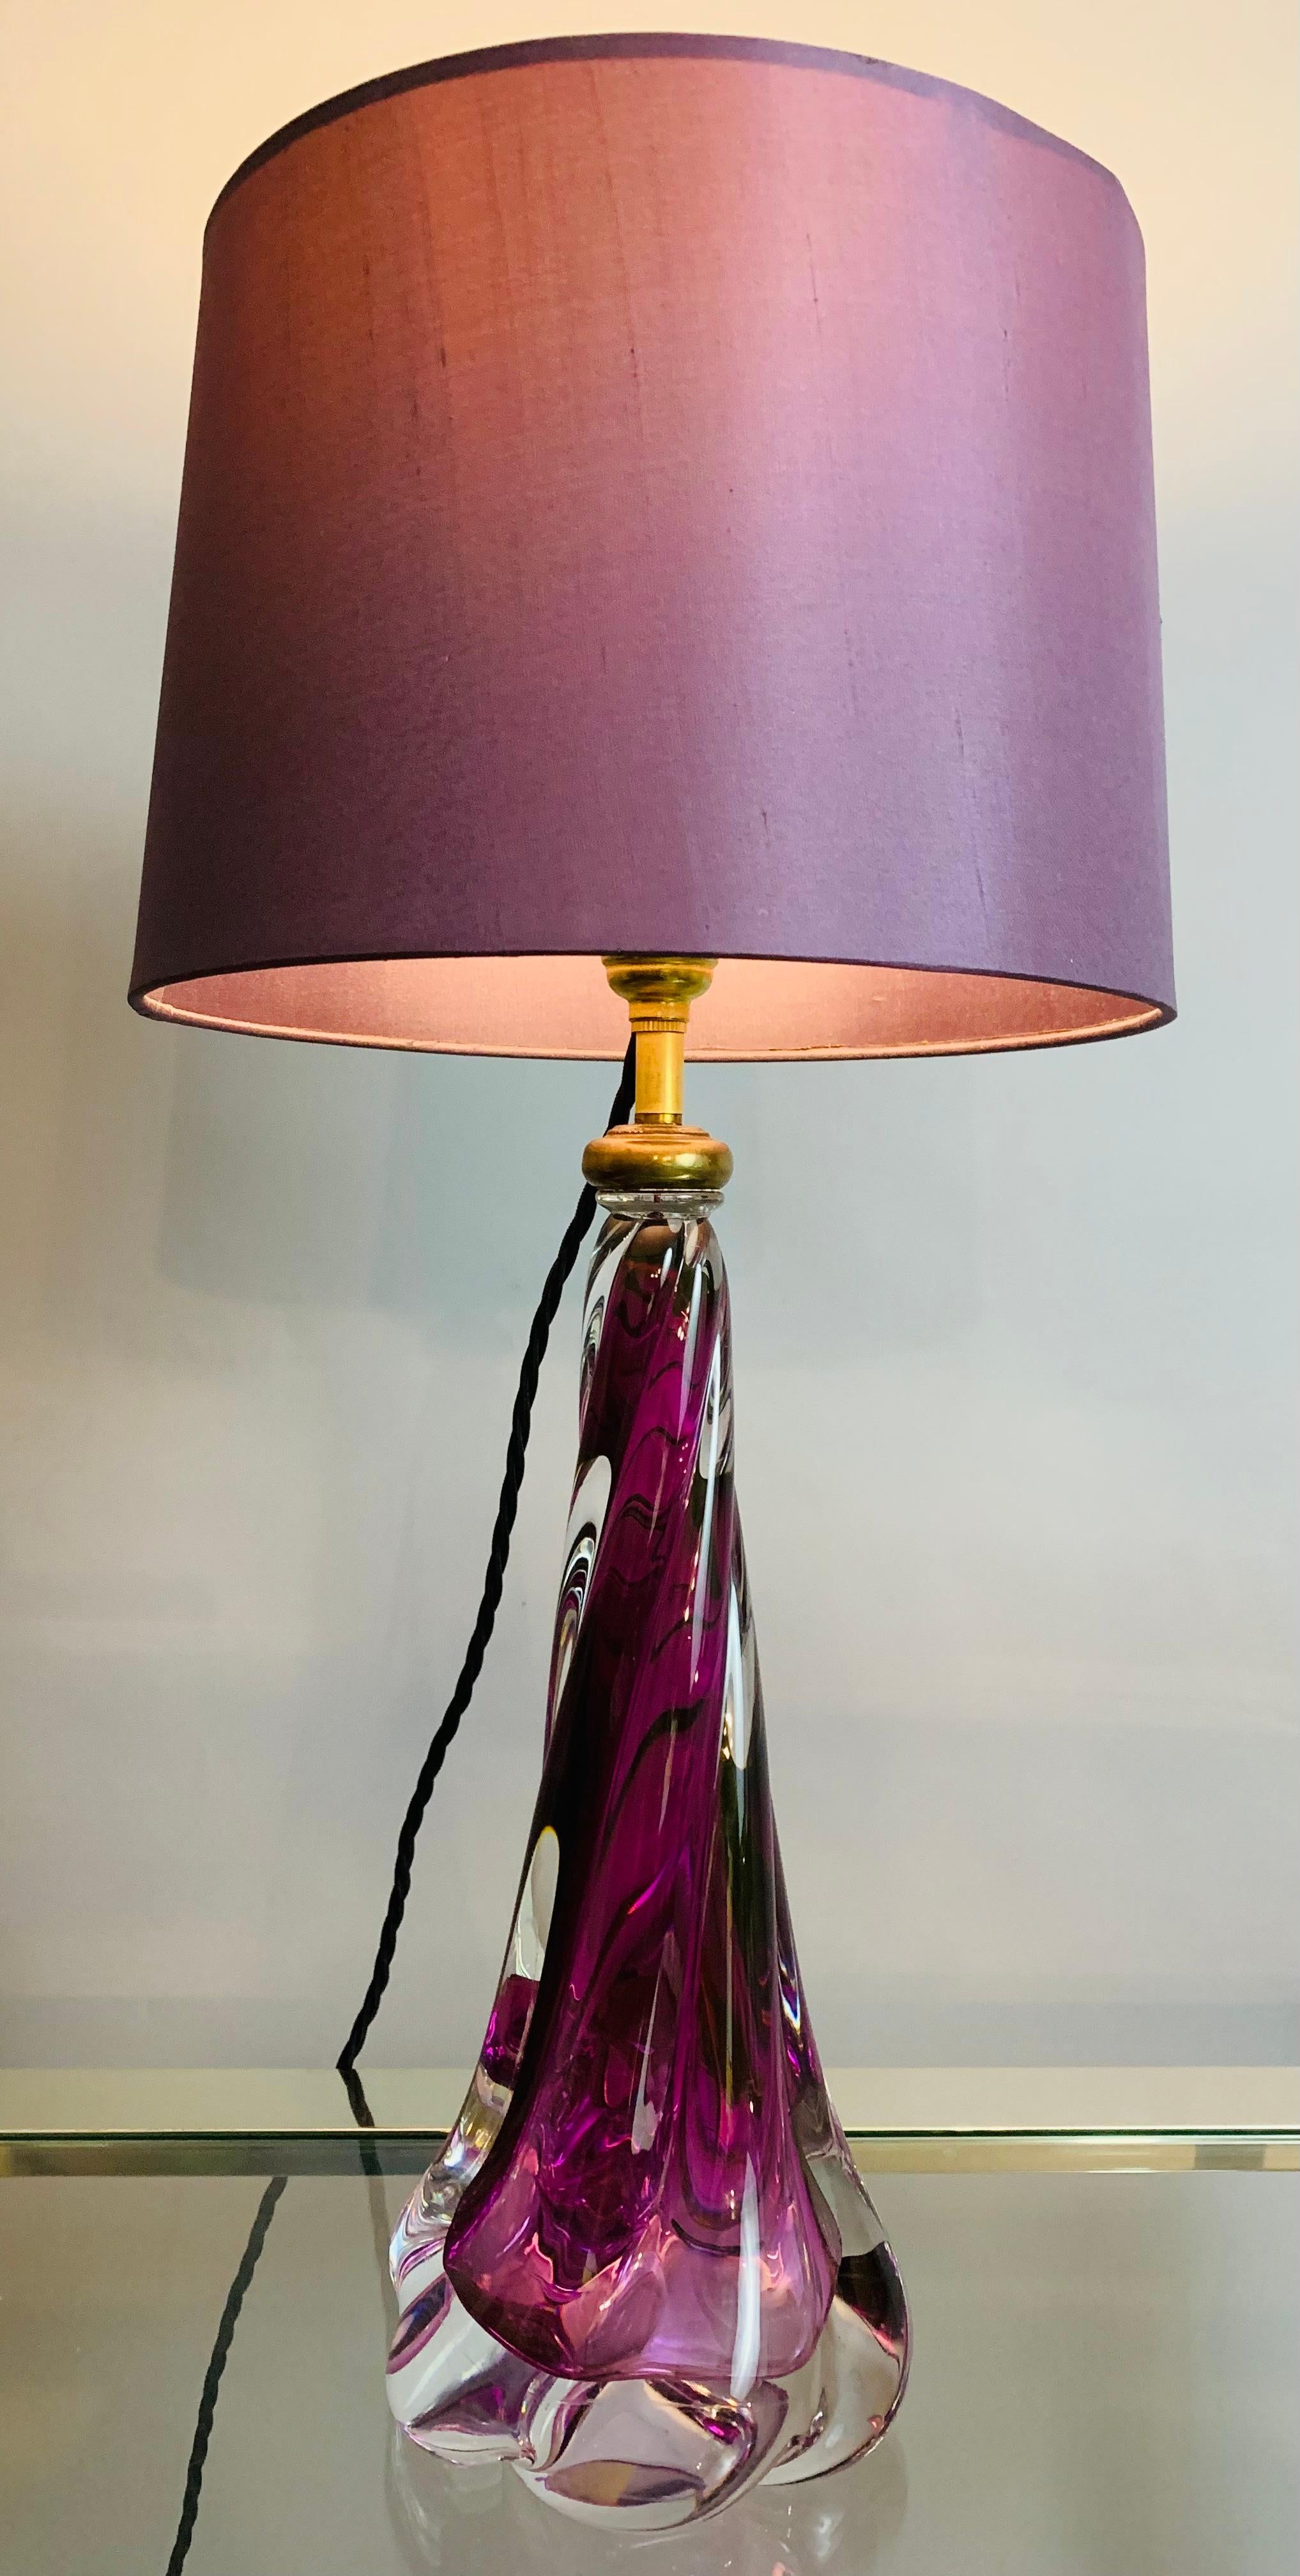 1950s Belgium Val Saint Lambert purple and clear crystal glass twisted lamp base. The lamp base fades from a deep purple at the top to become clearer towards the base. The lamp base has a beautiful flowing swirled design making it a perfect addition